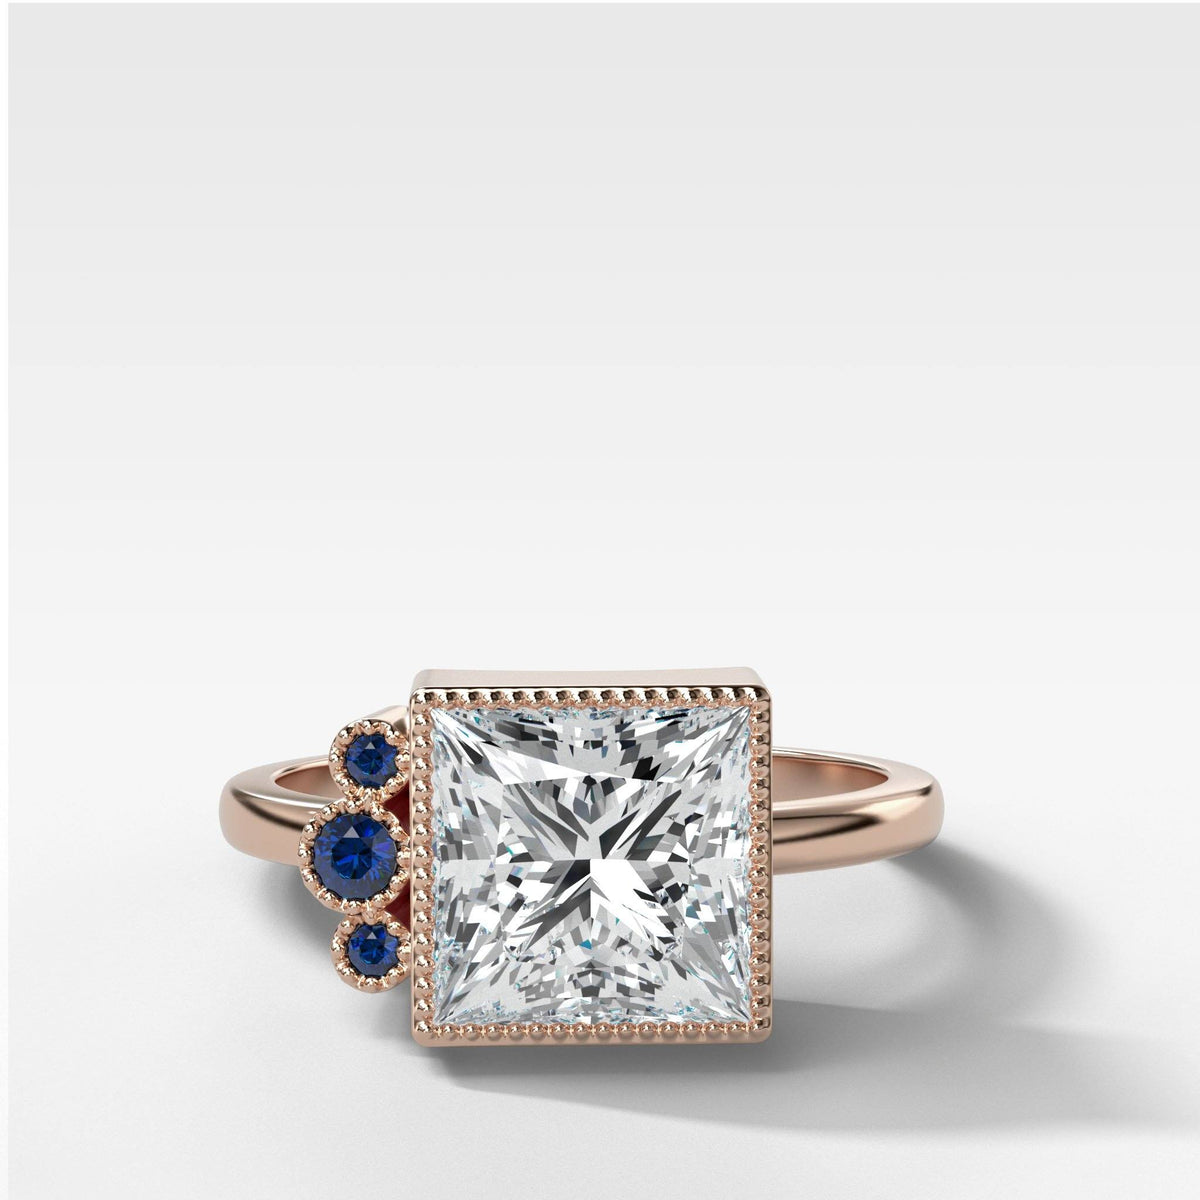 Square Sapphire Ring - Gardens of the Sun | Ethical Jewelry